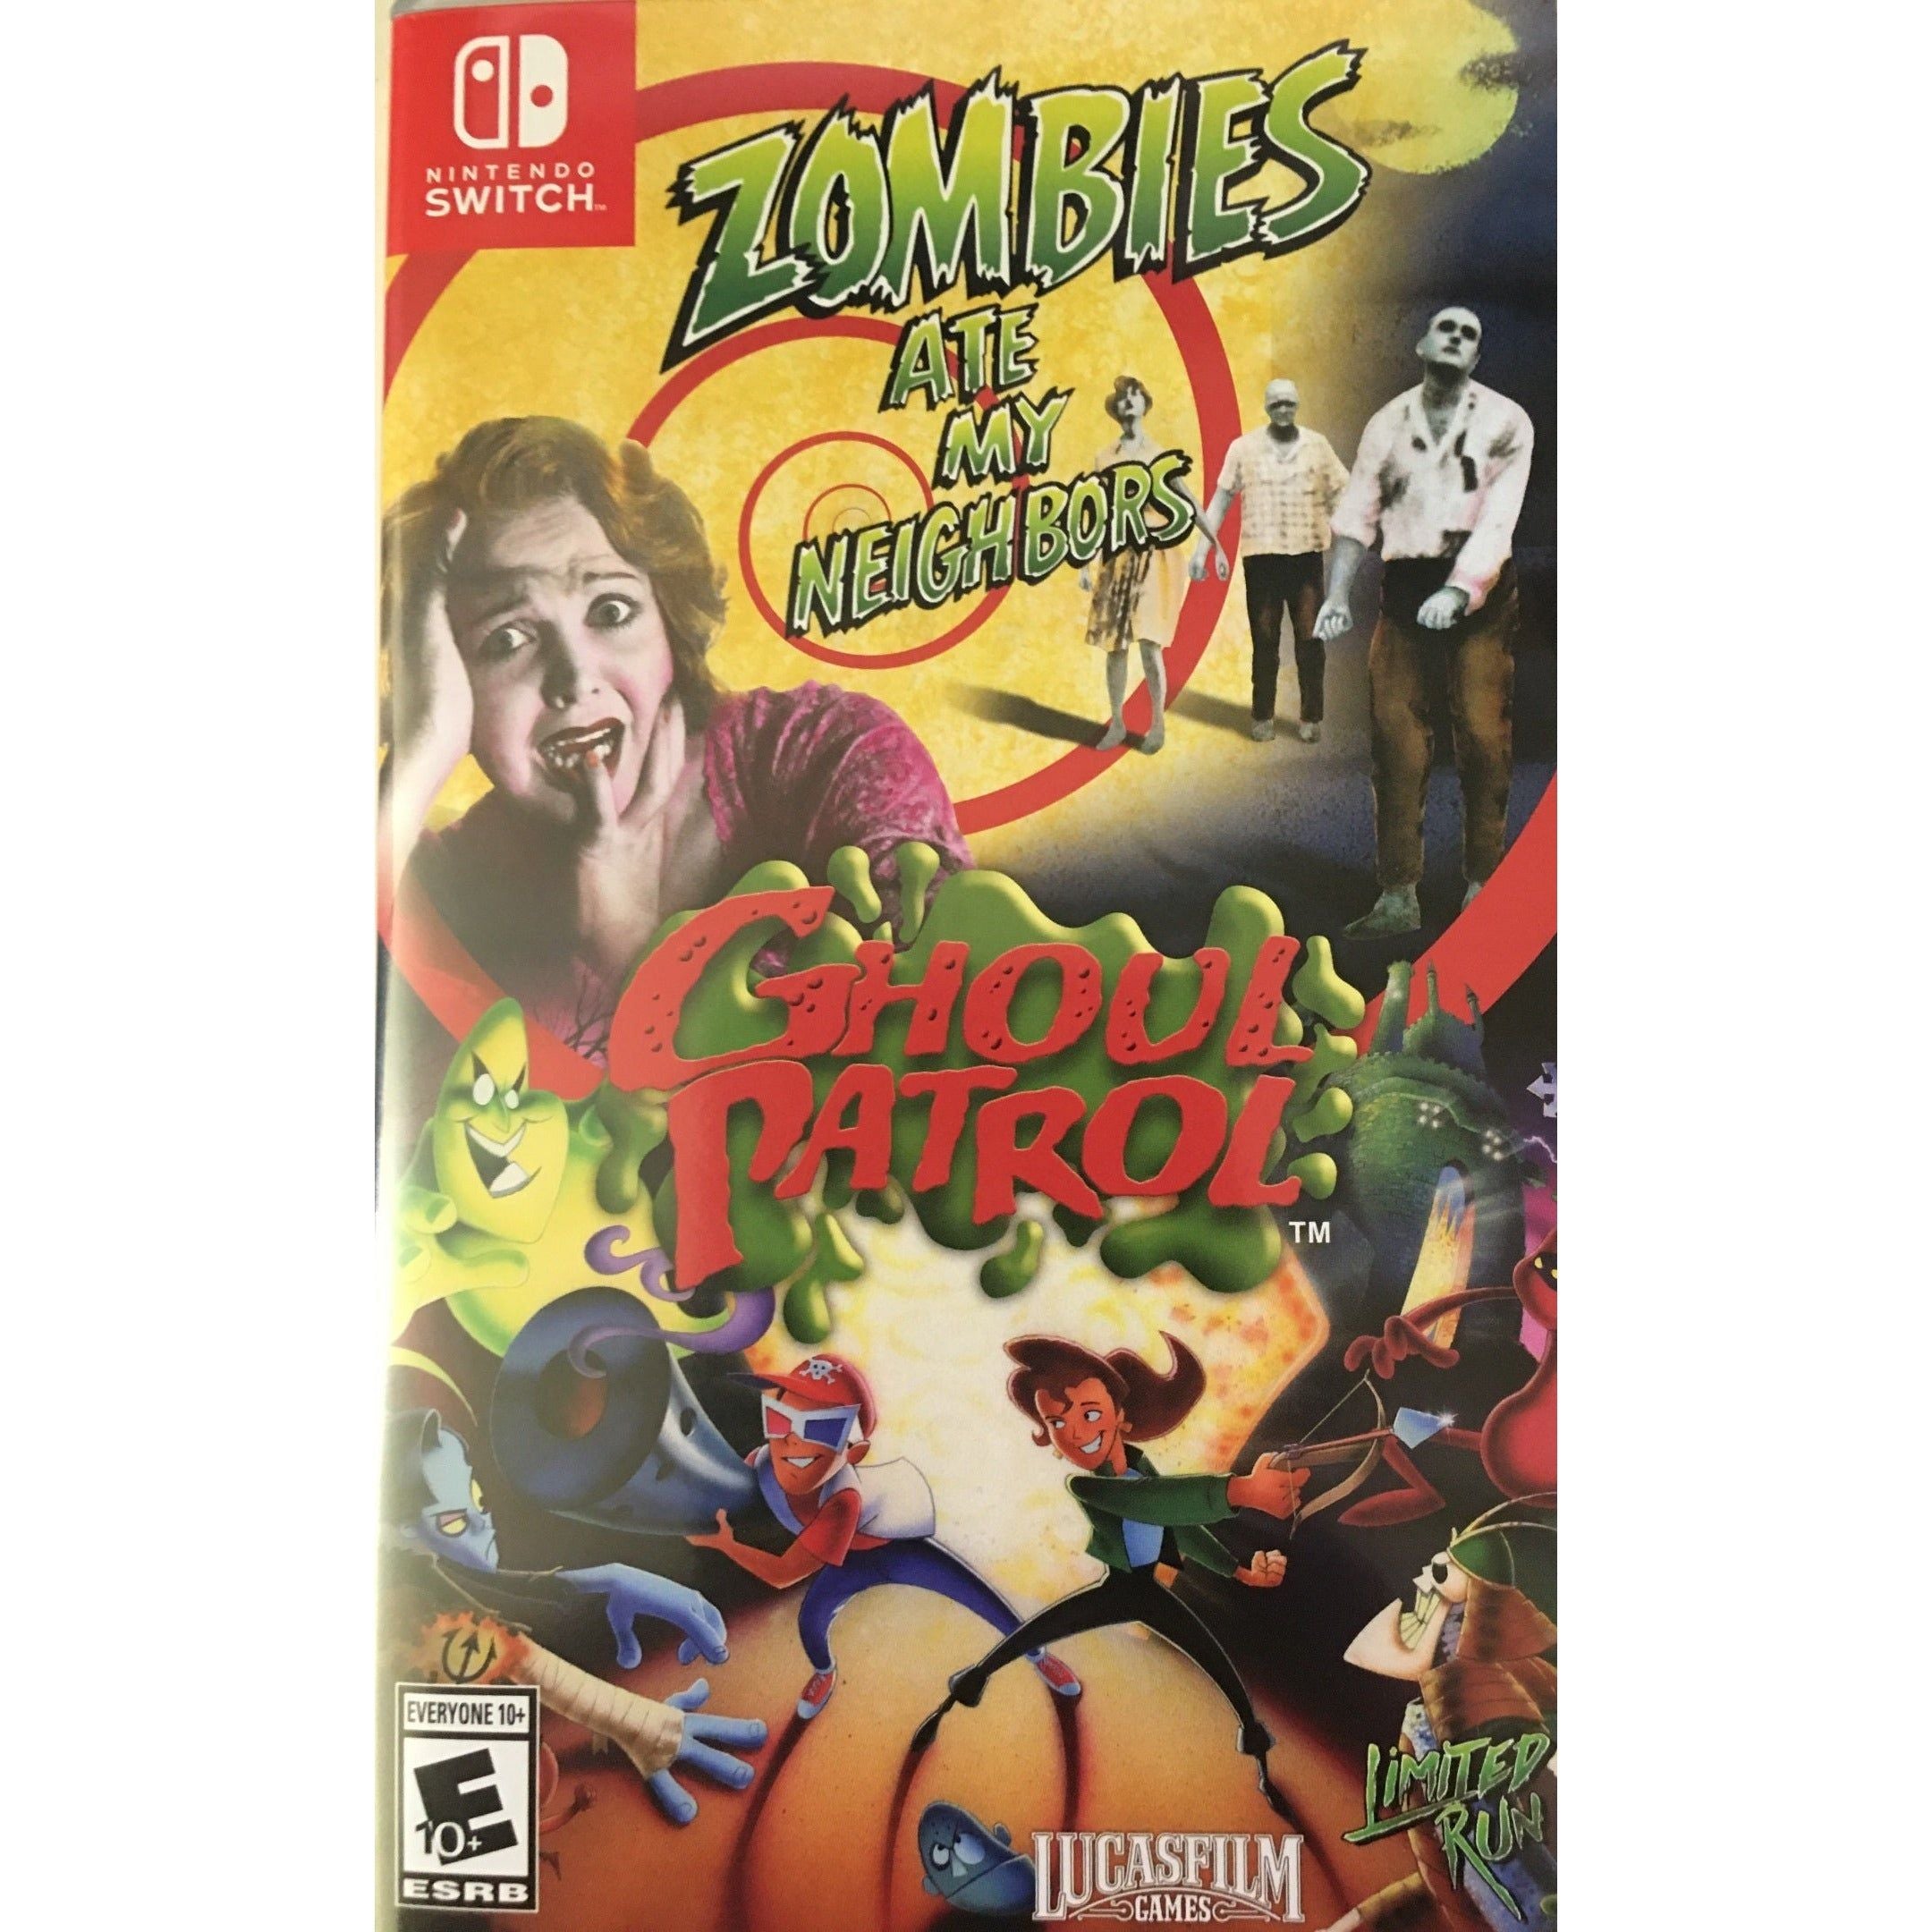 Switch - Zombies Ate My Neighbors and Ghoul Patrol (Limited Run Game #112) (In Case / Sealed)